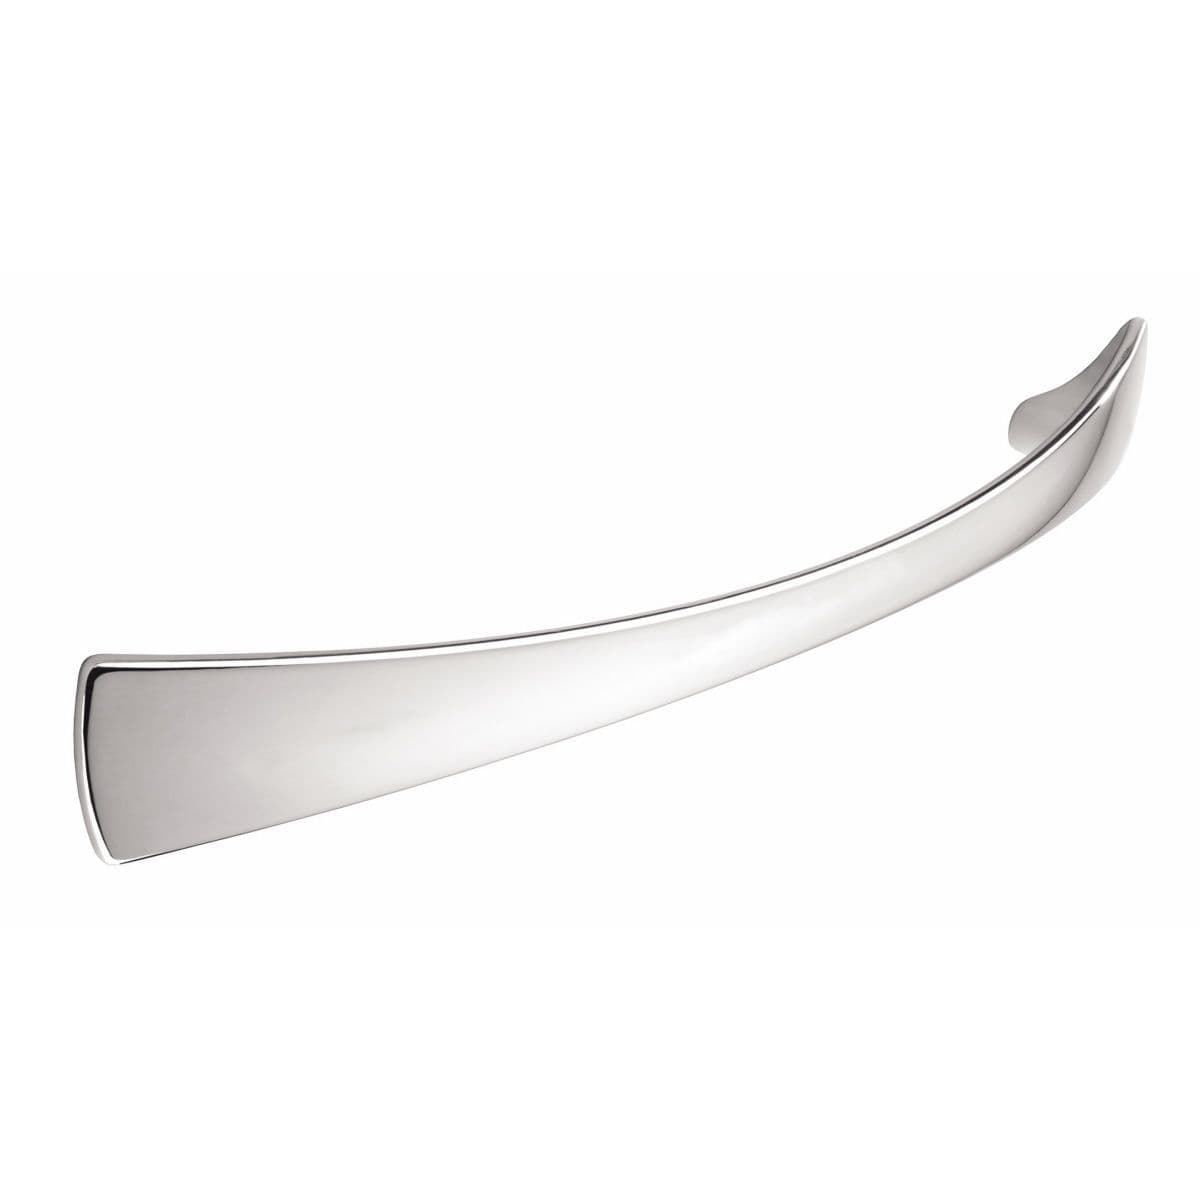 CASSOP TAPERED BOW Cupboard Handle - 128mm h/c size - 2 finishes (PWS H1071.128)